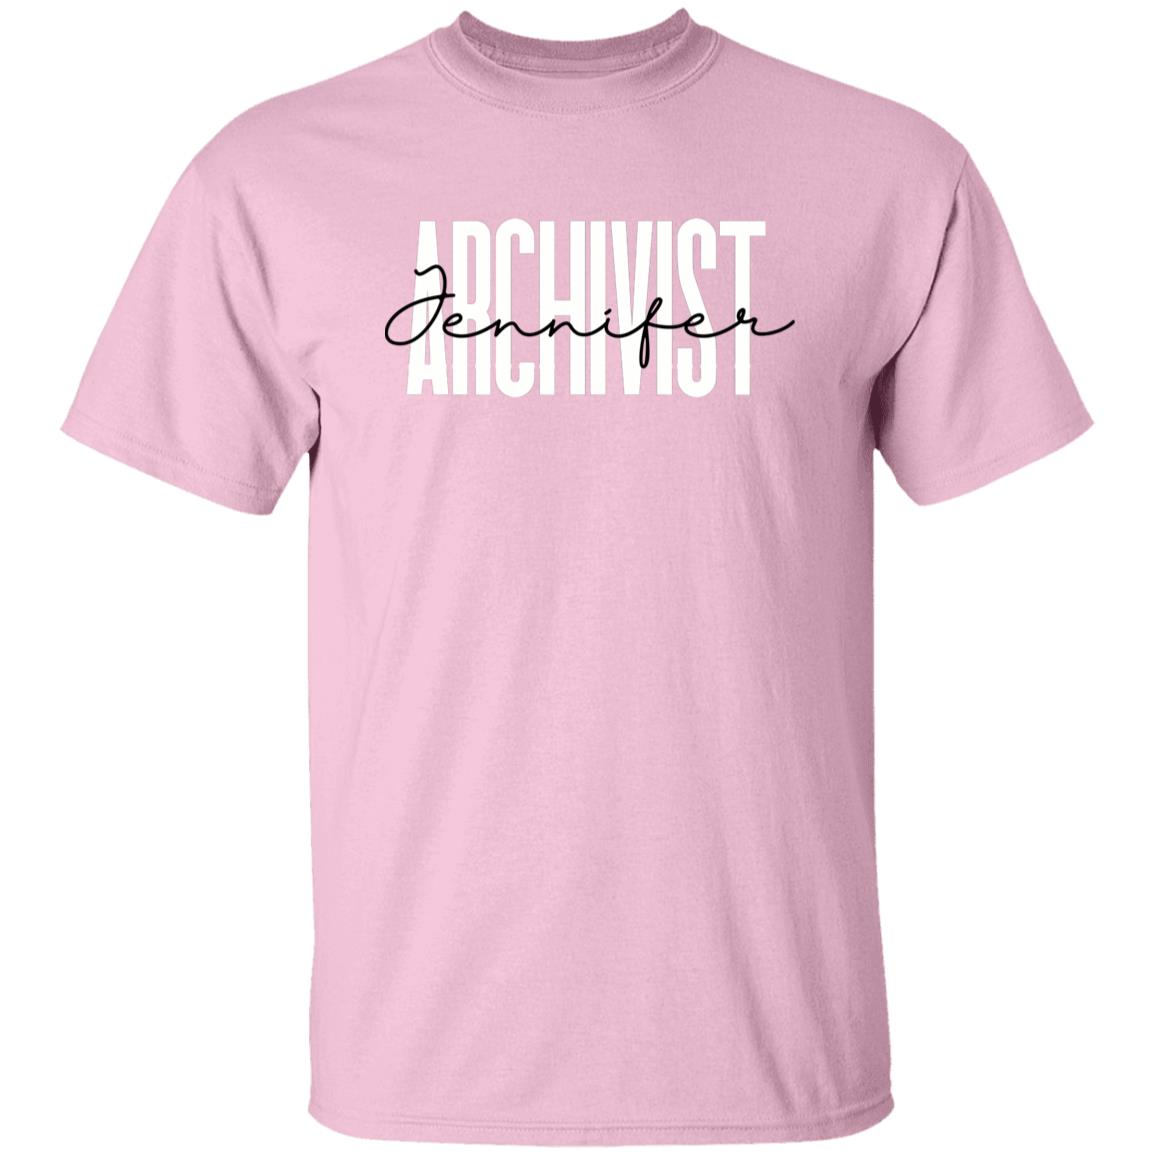 Personalized Archivist Unisex T-shirt Custom name Archival science Sand Blue Pink-Family-Gift-Planet